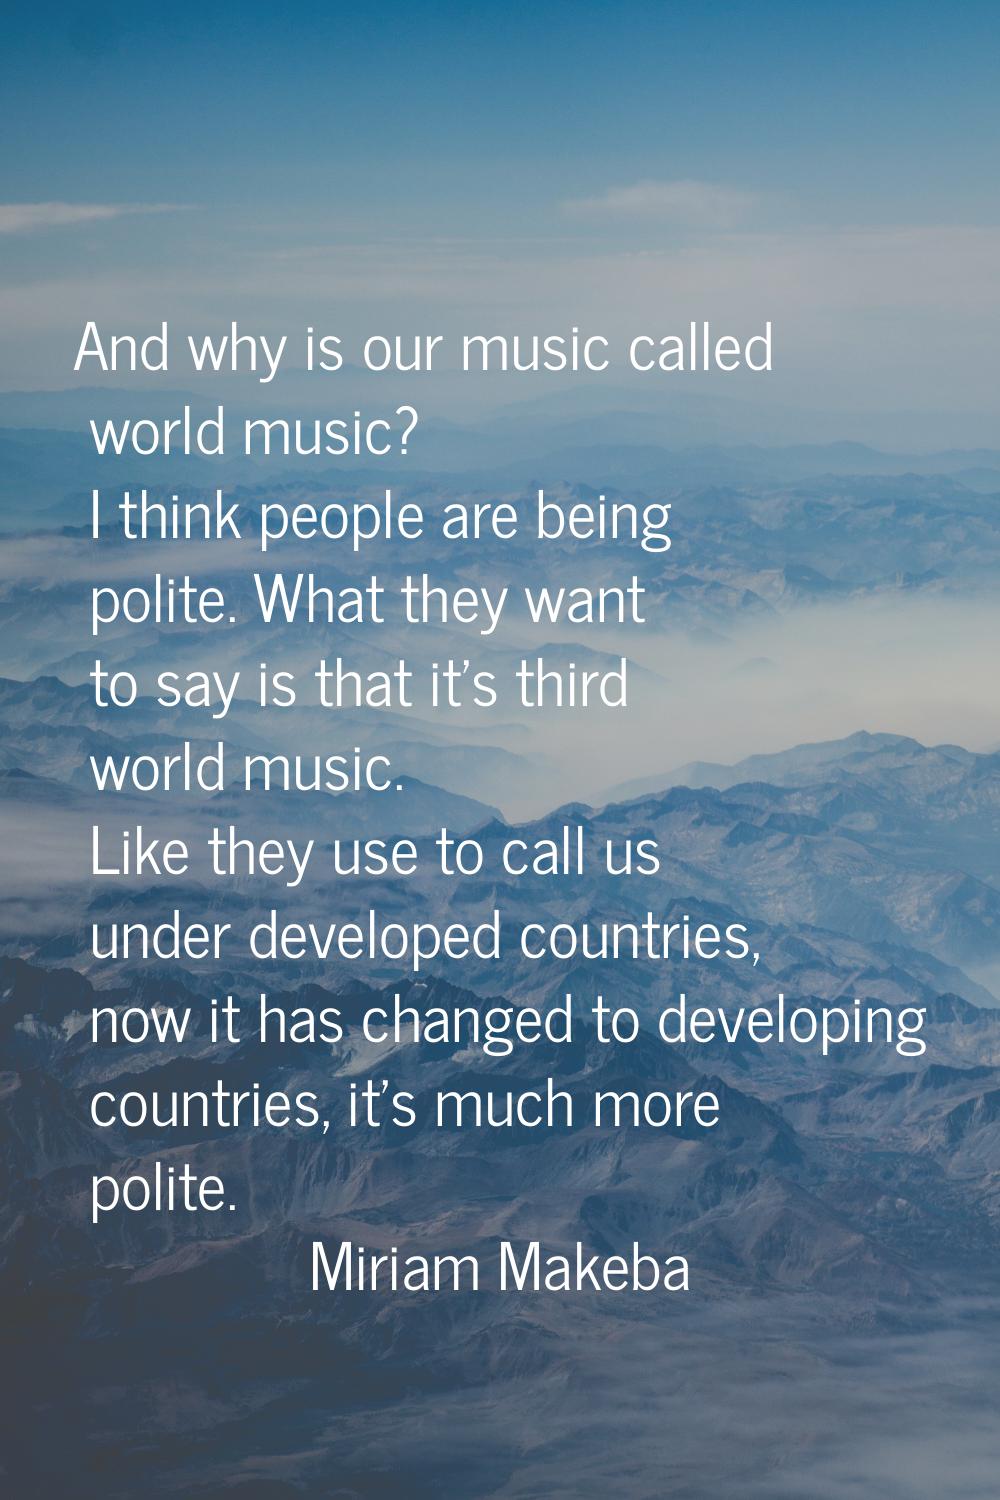 And why is our music called world music? I think people are being polite. What they want to say is 